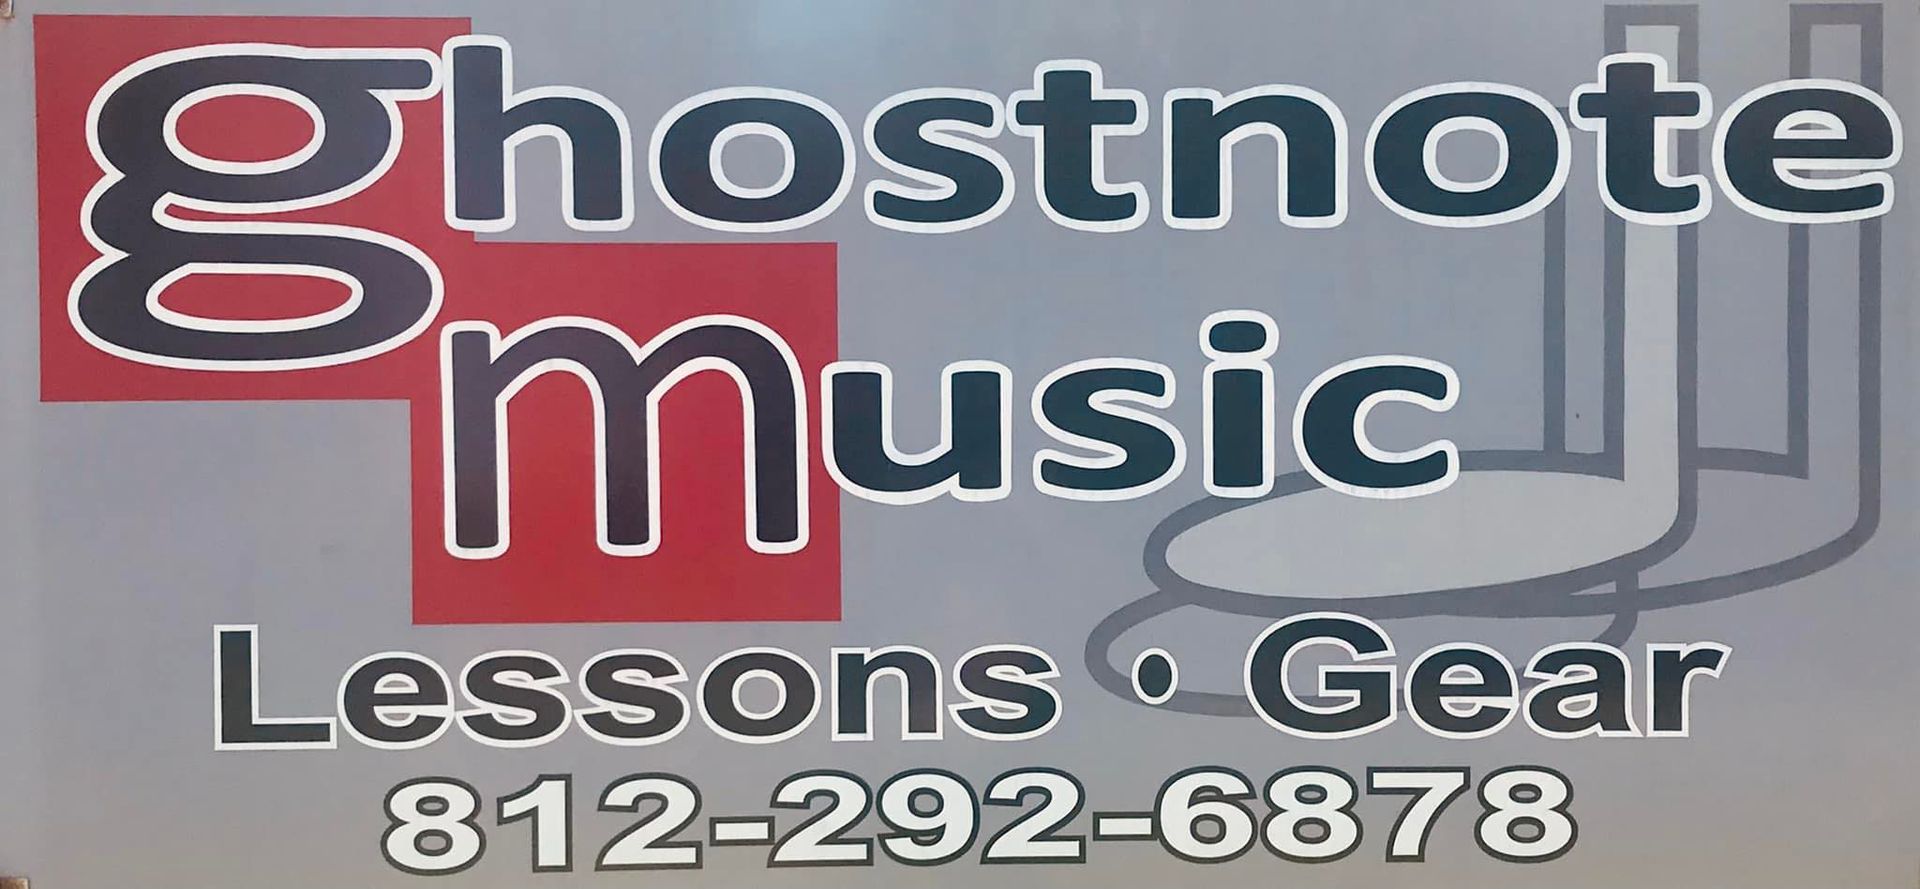 A sign for ghostnote music lessons and gear